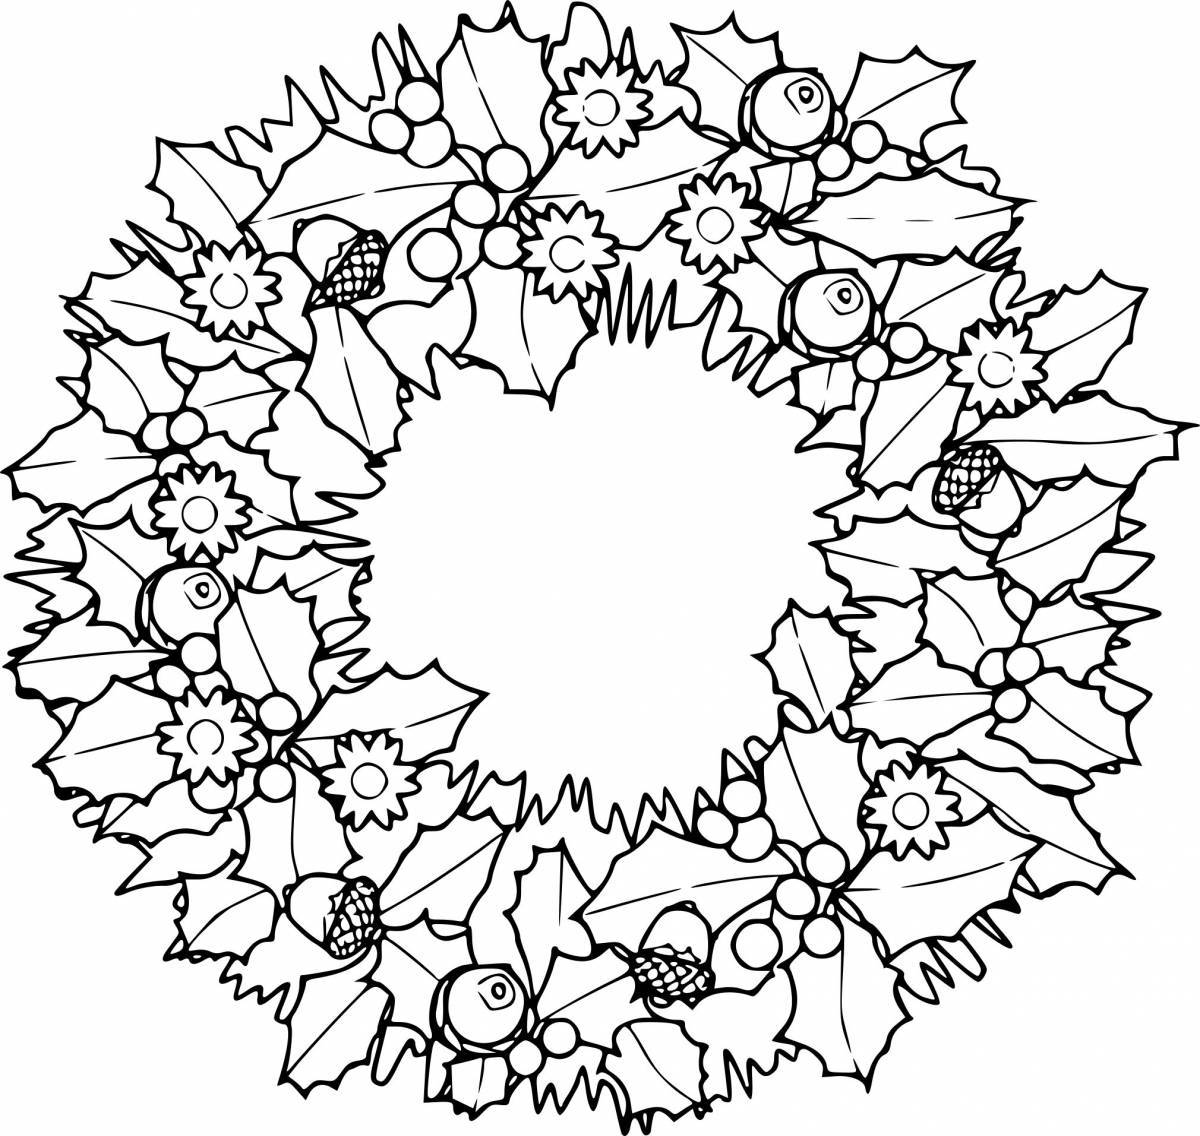 Exquisite Christmas wreath coloring book